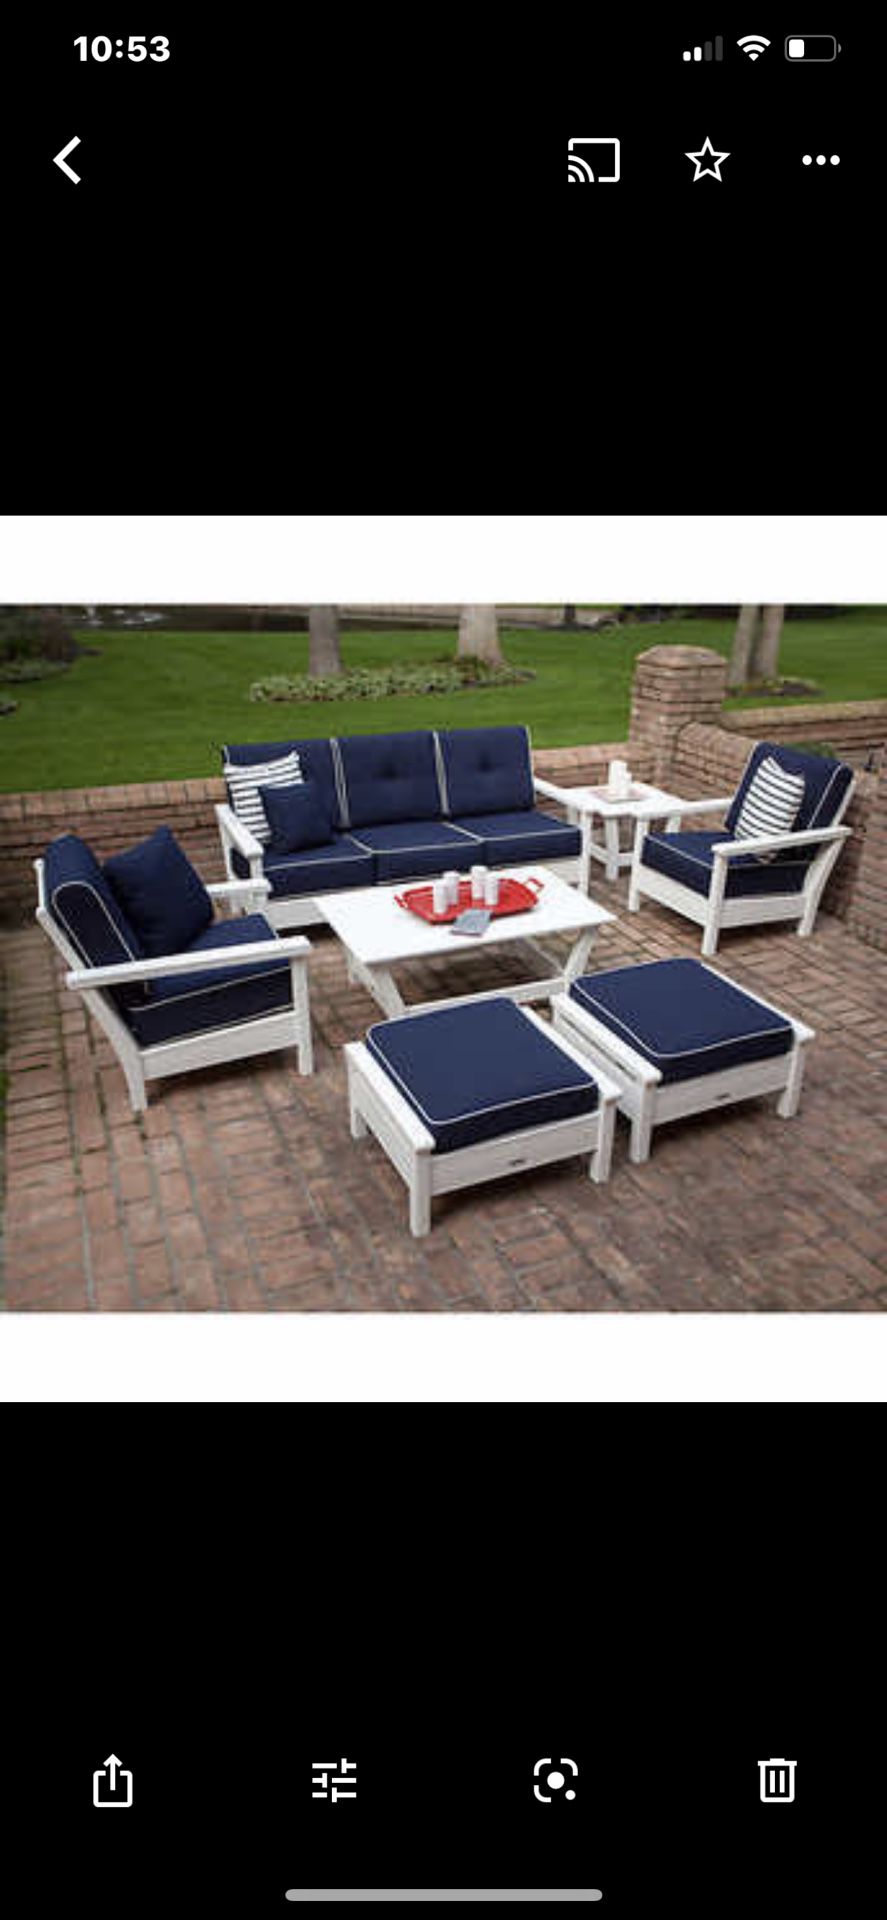 Patio / Deck Deep Cushion ALL WEATHER Treated Furniture  